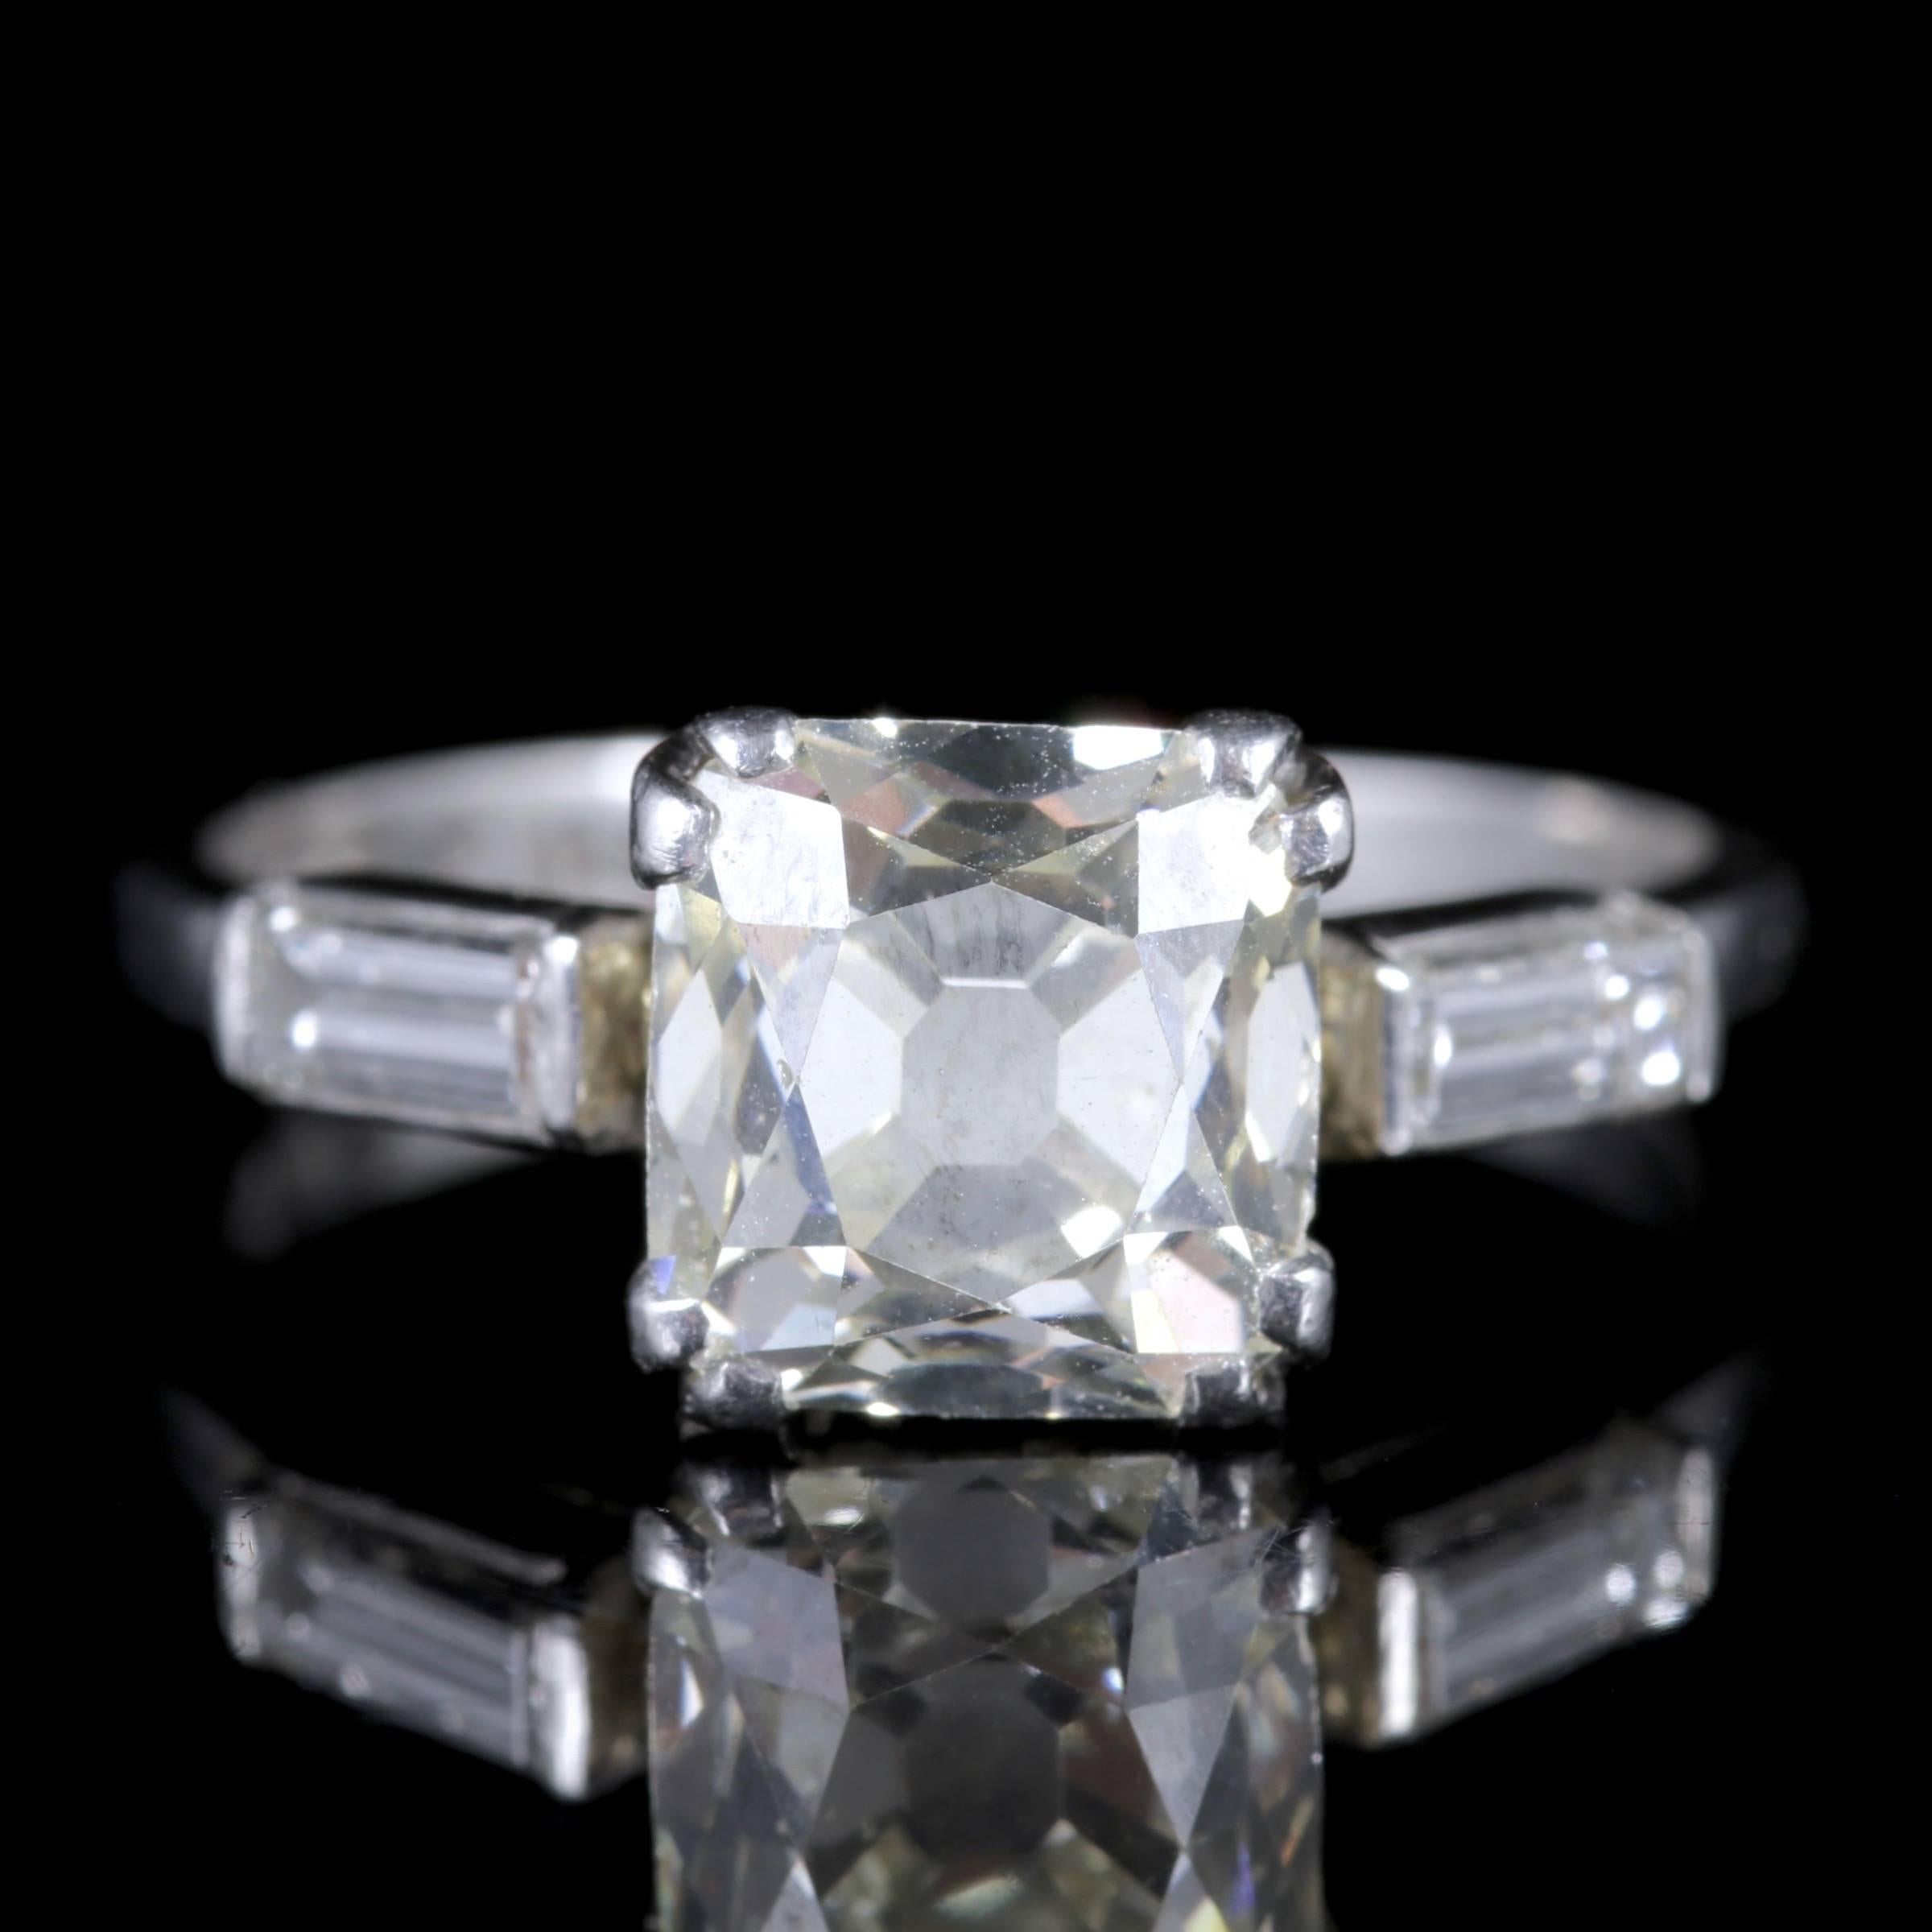 This fabulous all Platinum Art Deco Diamond ring boasts a spectacular 1.80ct cushion cut square Diamond which is all original to the shank.

Two beautiful bright white baguette Diamonds compliment the shoulders of this amazing ring.

The large